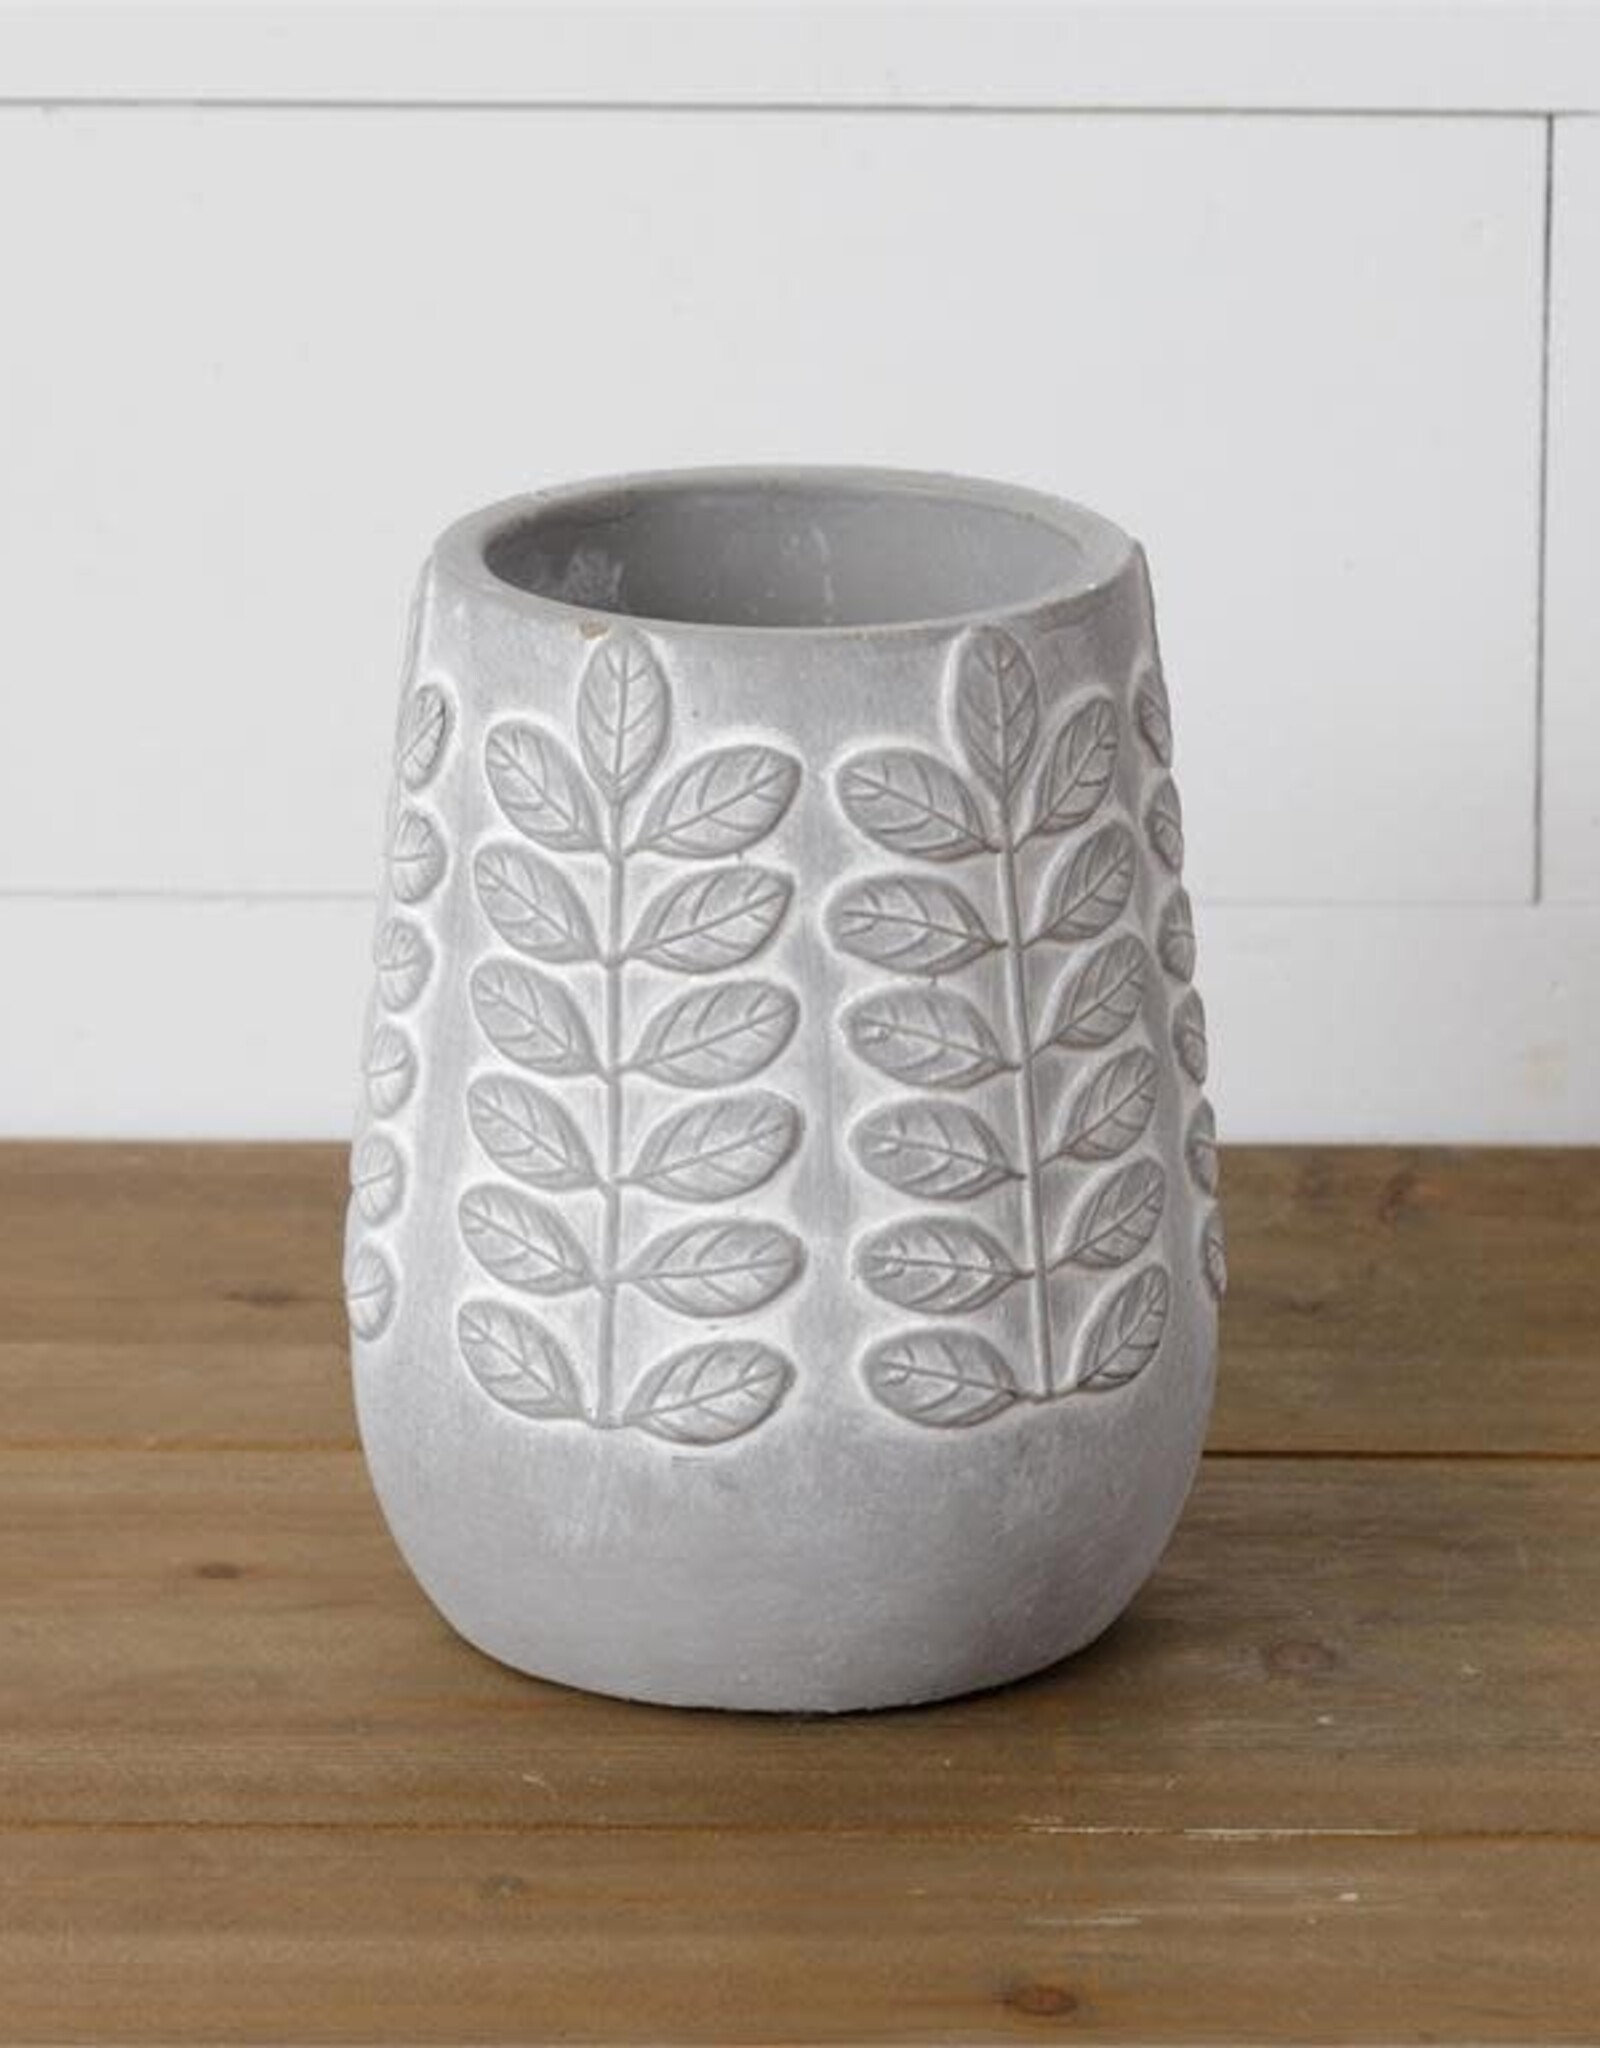 Planter - Embellished Cement  6.75" H x 5" Dia